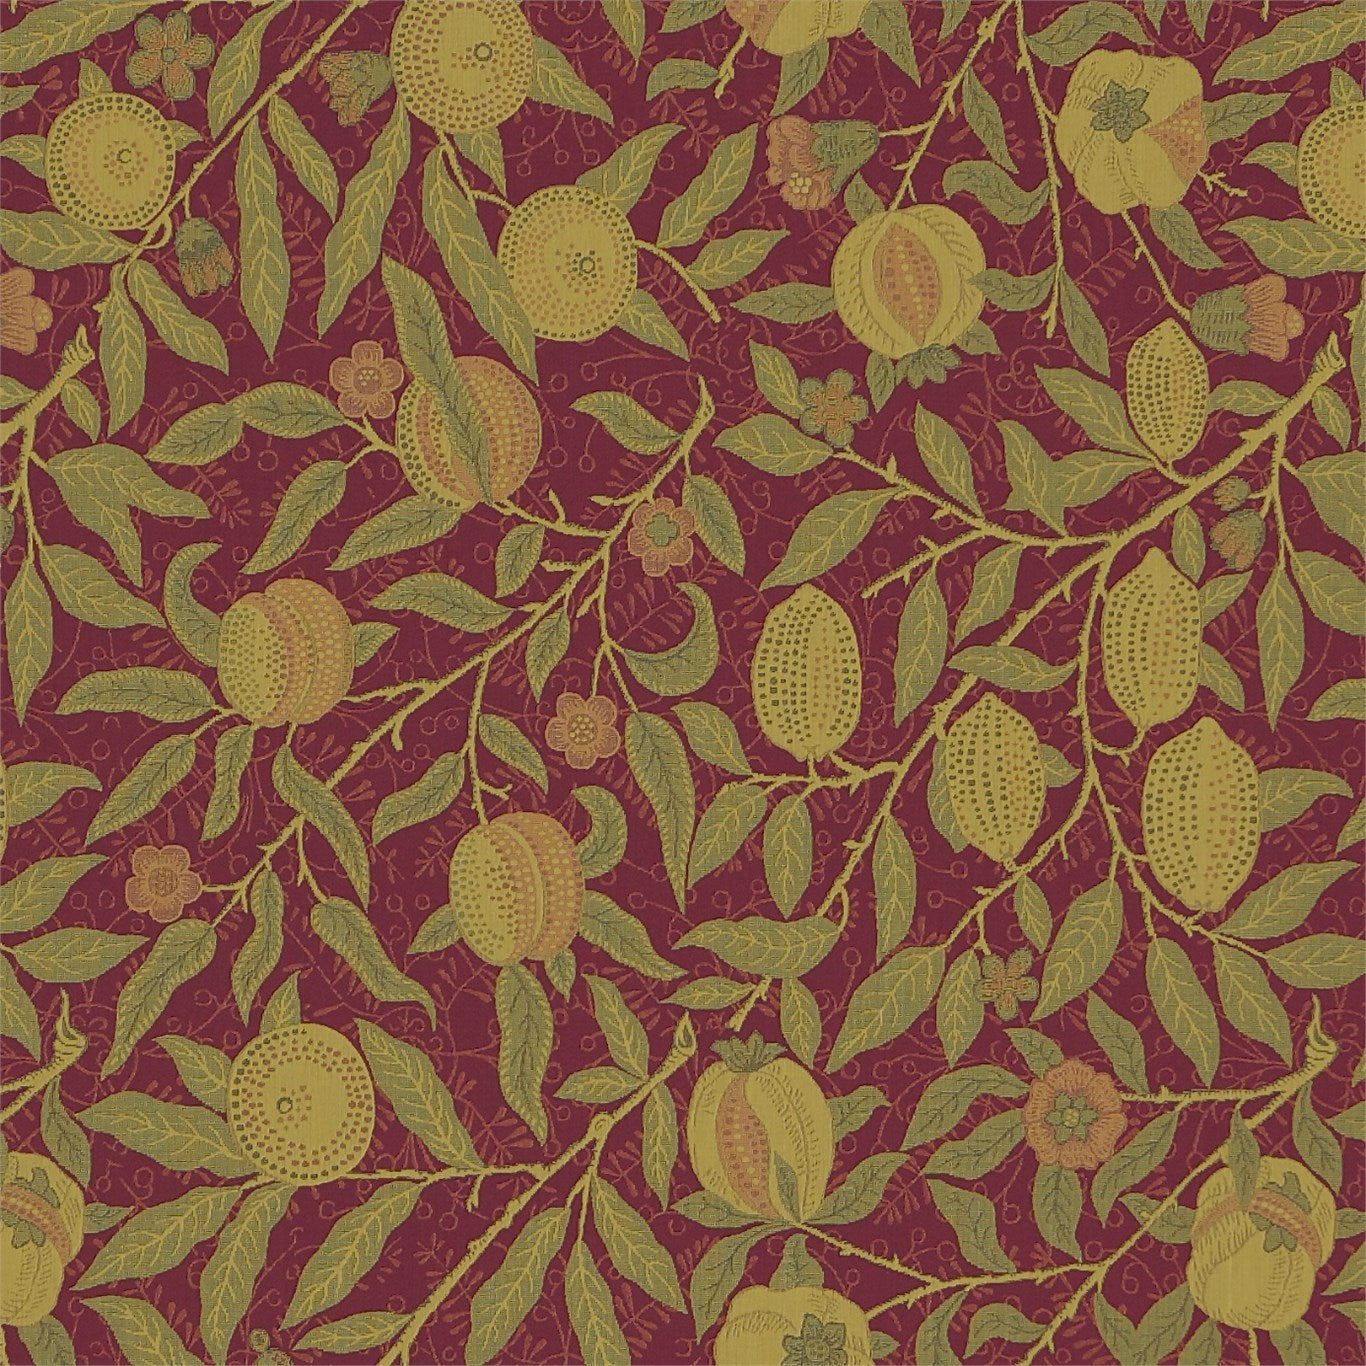 Fruit Fabric by Morris & Co.